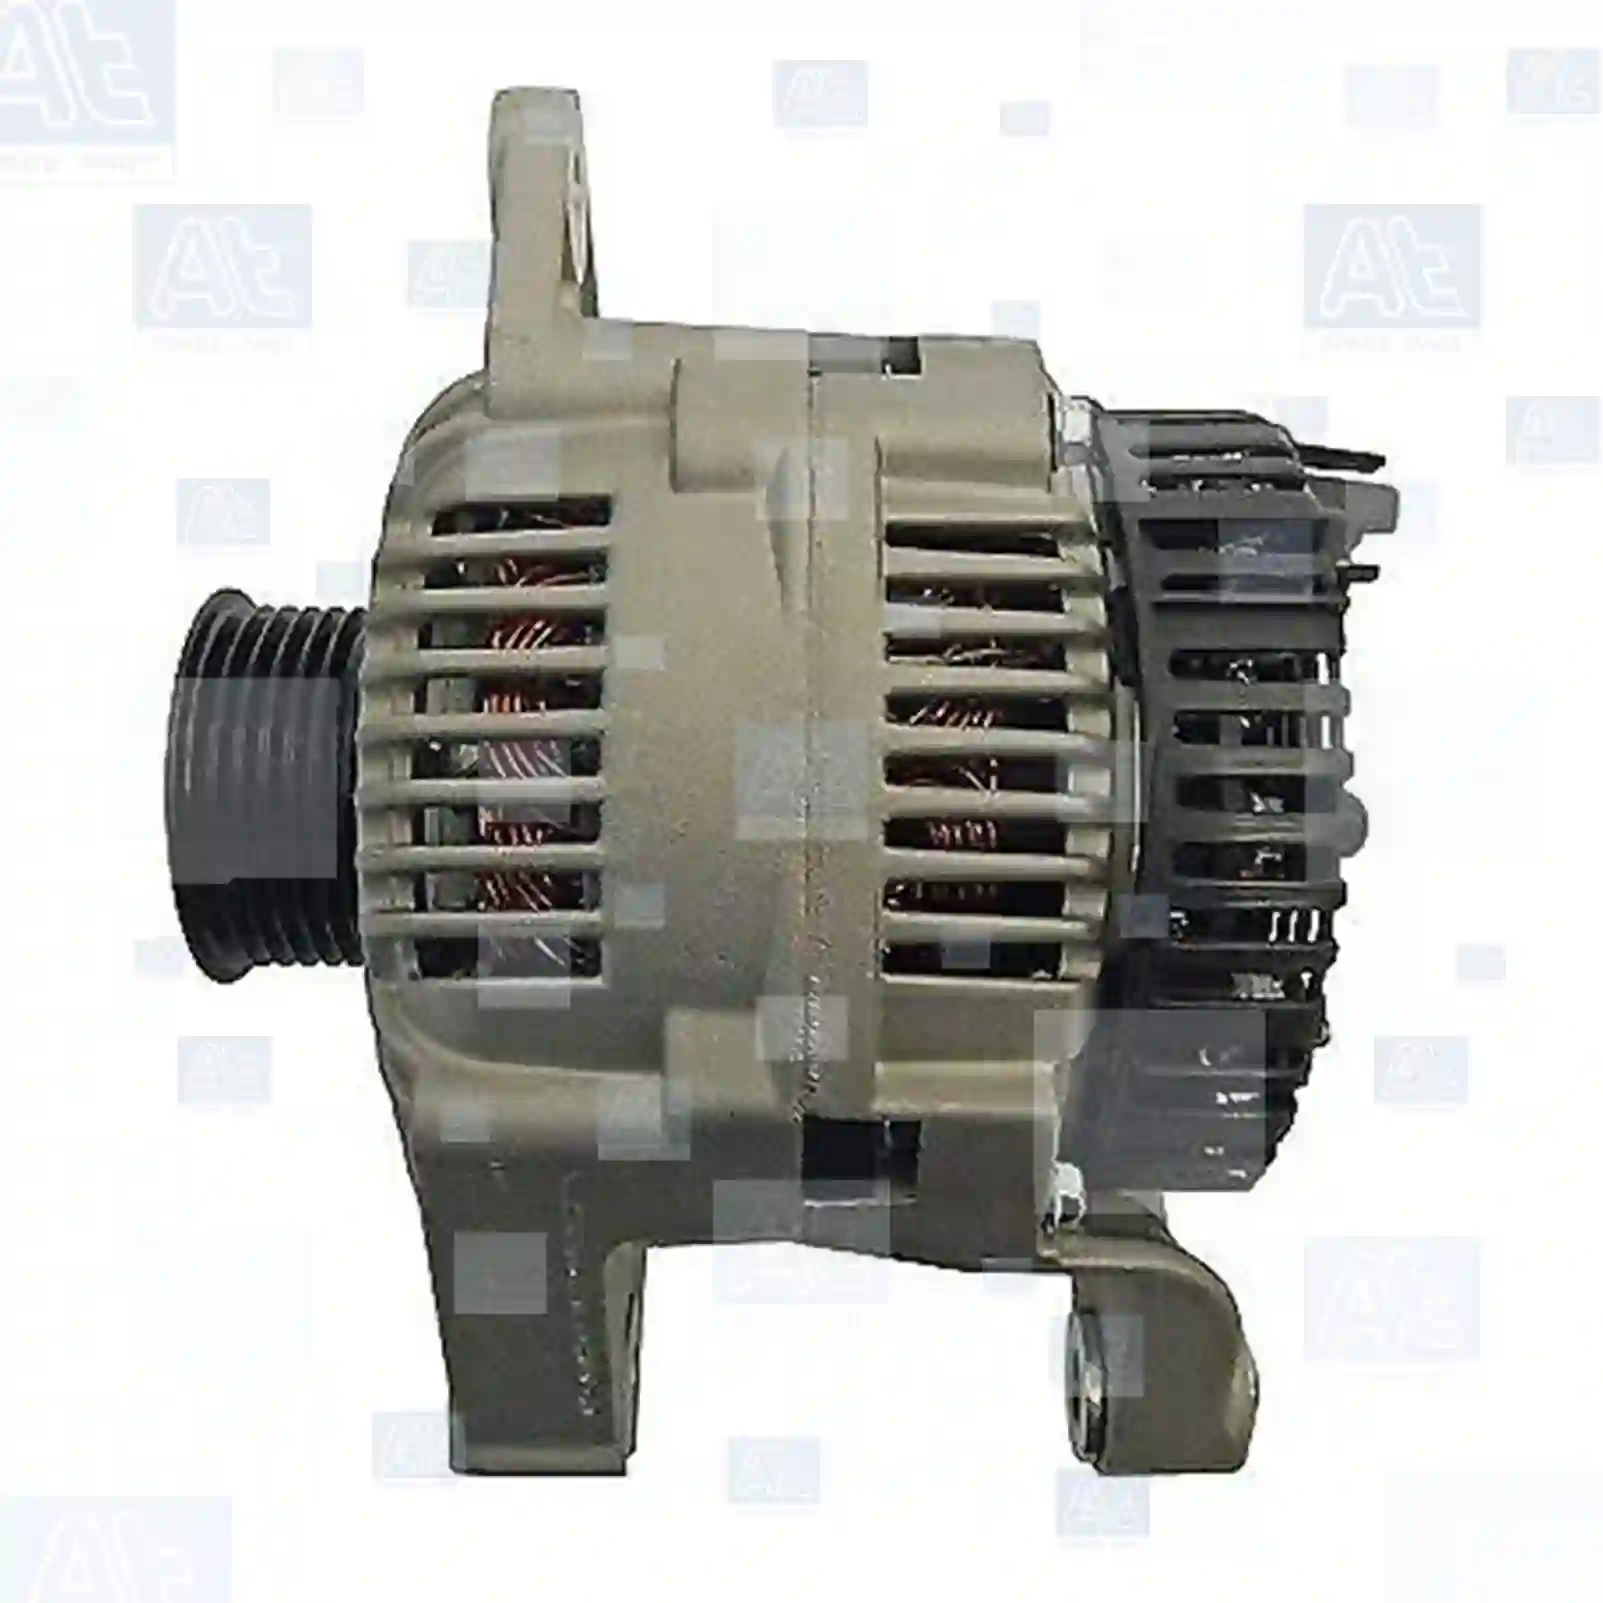 Alternator, at no 77711544, oem no: 5701A8, 5705A3, 5705A4, 5705E7, 5705FR, 5705G5, 5705G8, 5705H7, 5705HG, 5705HN, 5705J8, 5705N7, 5706J2, 5707C6, 9566774680, 9603552680, 9610382280, 9610601580, 9610601880, 9610870880, 9610870980, 9615715880, 9615735880, 9616862980, 9617376180, 9618673980, 9619333080, 9619333280, 9631318680, 9610601580, 9616862980, 9619333080, 9631318680, 9610601580, 9610601880, 9616862980, 9619333080, 9619333280, 9631318680, 96103822, 9610601580, 9616862980, 9619333080, 9631318680, SA216, 5701A8, 5705A3, 5705A4, 5705E7, 5705FR, 5705G5, 5705G8, 5705H7, 5705HG, 5705HN, 5705J8, 5705N7, 5706J2, 5707C6, 9566774680, 9603552680, 9610382280, 9610601580, 9610601880, 9610870880, 9610870980, 9615715880, 9615735880, 9616862980, 9617376180, 9618673980, 9619333080, 9619333280, 9631318680 At Spare Part | Engine, Accelerator Pedal, Camshaft, Connecting Rod, Crankcase, Crankshaft, Cylinder Head, Engine Suspension Mountings, Exhaust Manifold, Exhaust Gas Recirculation, Filter Kits, Flywheel Housing, General Overhaul Kits, Engine, Intake Manifold, Oil Cleaner, Oil Cooler, Oil Filter, Oil Pump, Oil Sump, Piston & Liner, Sensor & Switch, Timing Case, Turbocharger, Cooling System, Belt Tensioner, Coolant Filter, Coolant Pipe, Corrosion Prevention Agent, Drive, Expansion Tank, Fan, Intercooler, Monitors & Gauges, Radiator, Thermostat, V-Belt / Timing belt, Water Pump, Fuel System, Electronical Injector Unit, Feed Pump, Fuel Filter, cpl., Fuel Gauge Sender,  Fuel Line, Fuel Pump, Fuel Tank, Injection Line Kit, Injection Pump, Exhaust System, Clutch & Pedal, Gearbox, Propeller Shaft, Axles, Brake System, Hubs & Wheels, Suspension, Leaf Spring, Universal Parts / Accessories, Steering, Electrical System, Cabin Alternator, at no 77711544, oem no: 5701A8, 5705A3, 5705A4, 5705E7, 5705FR, 5705G5, 5705G8, 5705H7, 5705HG, 5705HN, 5705J8, 5705N7, 5706J2, 5707C6, 9566774680, 9603552680, 9610382280, 9610601580, 9610601880, 9610870880, 9610870980, 9615715880, 9615735880, 9616862980, 9617376180, 9618673980, 9619333080, 9619333280, 9631318680, 9610601580, 9616862980, 9619333080, 9631318680, 9610601580, 9610601880, 9616862980, 9619333080, 9619333280, 9631318680, 96103822, 9610601580, 9616862980, 9619333080, 9631318680, SA216, 5701A8, 5705A3, 5705A4, 5705E7, 5705FR, 5705G5, 5705G8, 5705H7, 5705HG, 5705HN, 5705J8, 5705N7, 5706J2, 5707C6, 9566774680, 9603552680, 9610382280, 9610601580, 9610601880, 9610870880, 9610870980, 9615715880, 9615735880, 9616862980, 9617376180, 9618673980, 9619333080, 9619333280, 9631318680 At Spare Part | Engine, Accelerator Pedal, Camshaft, Connecting Rod, Crankcase, Crankshaft, Cylinder Head, Engine Suspension Mountings, Exhaust Manifold, Exhaust Gas Recirculation, Filter Kits, Flywheel Housing, General Overhaul Kits, Engine, Intake Manifold, Oil Cleaner, Oil Cooler, Oil Filter, Oil Pump, Oil Sump, Piston & Liner, Sensor & Switch, Timing Case, Turbocharger, Cooling System, Belt Tensioner, Coolant Filter, Coolant Pipe, Corrosion Prevention Agent, Drive, Expansion Tank, Fan, Intercooler, Monitors & Gauges, Radiator, Thermostat, V-Belt / Timing belt, Water Pump, Fuel System, Electronical Injector Unit, Feed Pump, Fuel Filter, cpl., Fuel Gauge Sender,  Fuel Line, Fuel Pump, Fuel Tank, Injection Line Kit, Injection Pump, Exhaust System, Clutch & Pedal, Gearbox, Propeller Shaft, Axles, Brake System, Hubs & Wheels, Suspension, Leaf Spring, Universal Parts / Accessories, Steering, Electrical System, Cabin